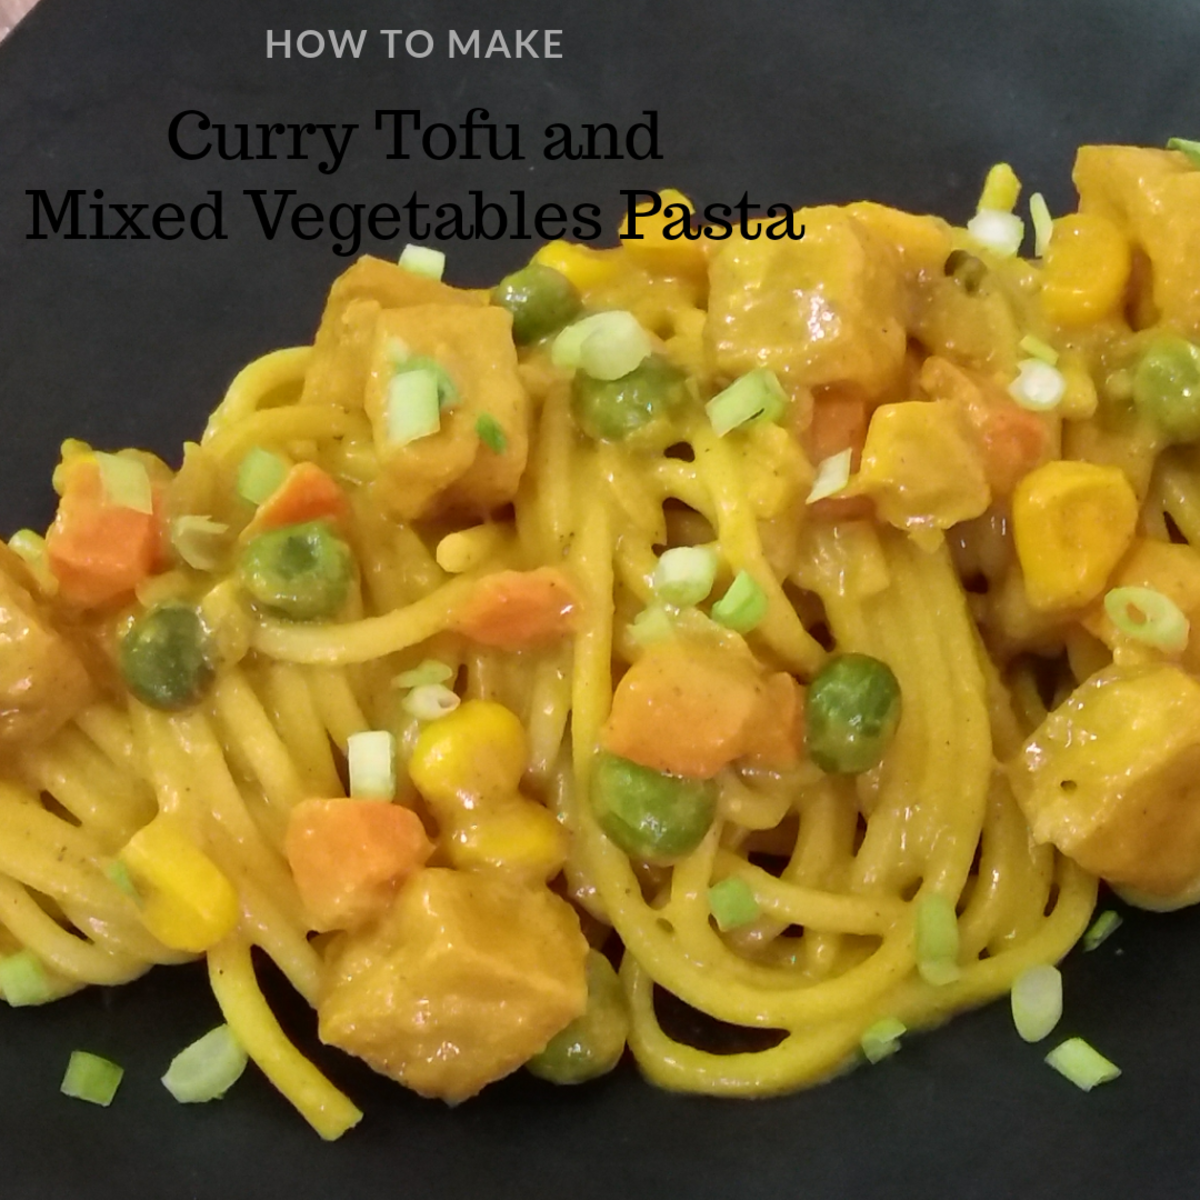 How to Make Spaghetti With Curried Tofu and Mixed Vegetables